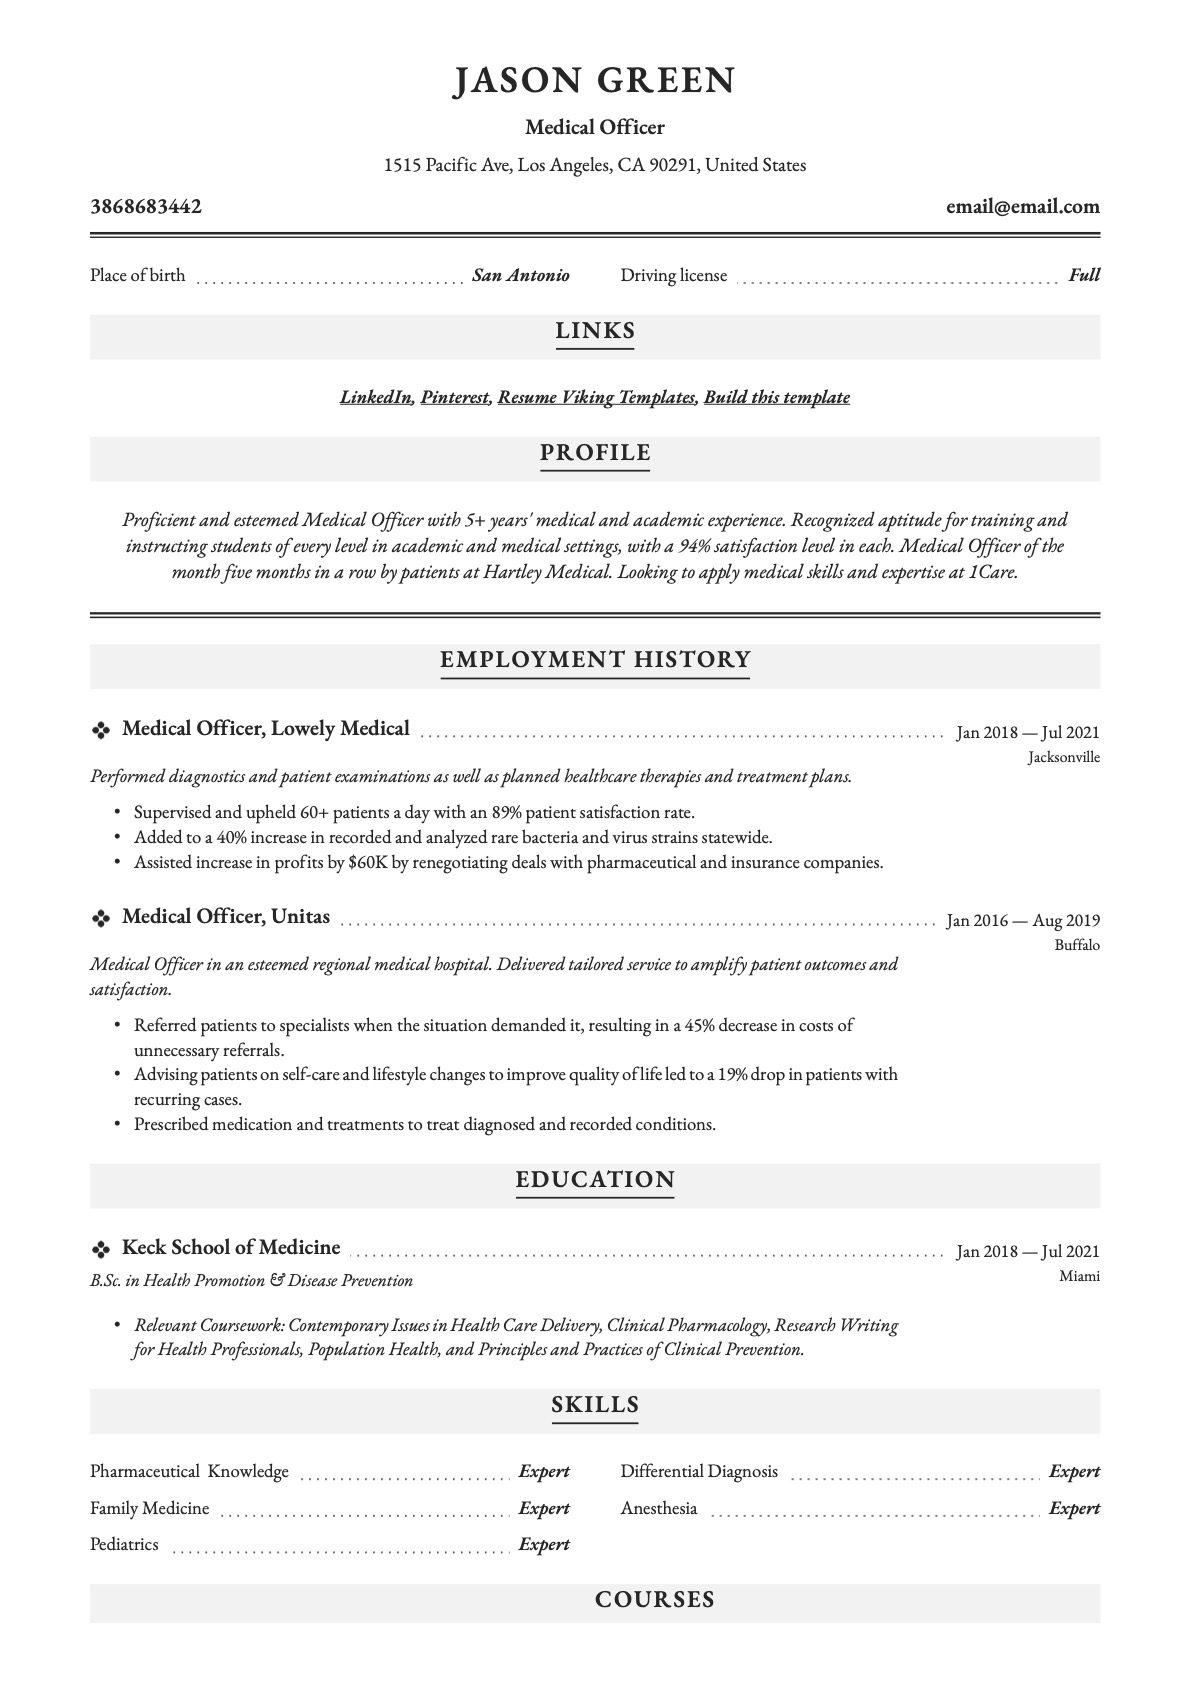 Professional Medical Officer Resume Example